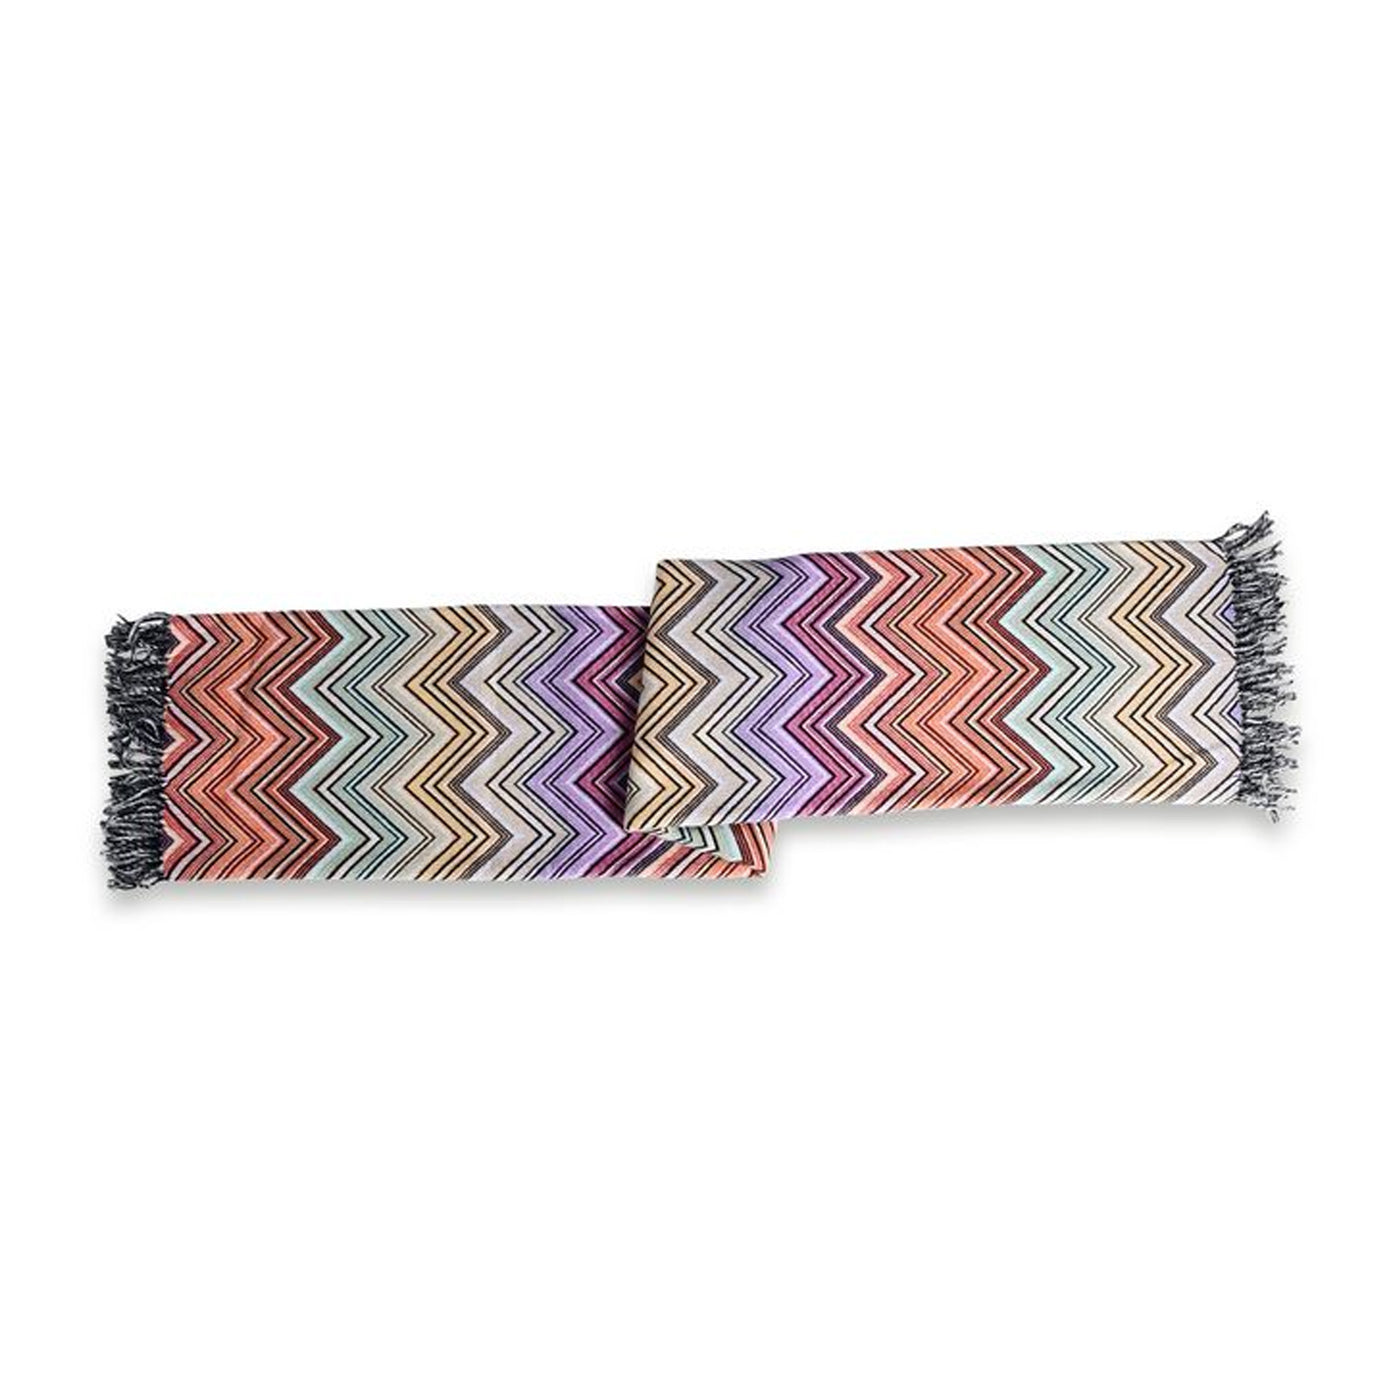 Perseo Throw , Missoni Home, Blankets + Throws- Julia Moss Designs